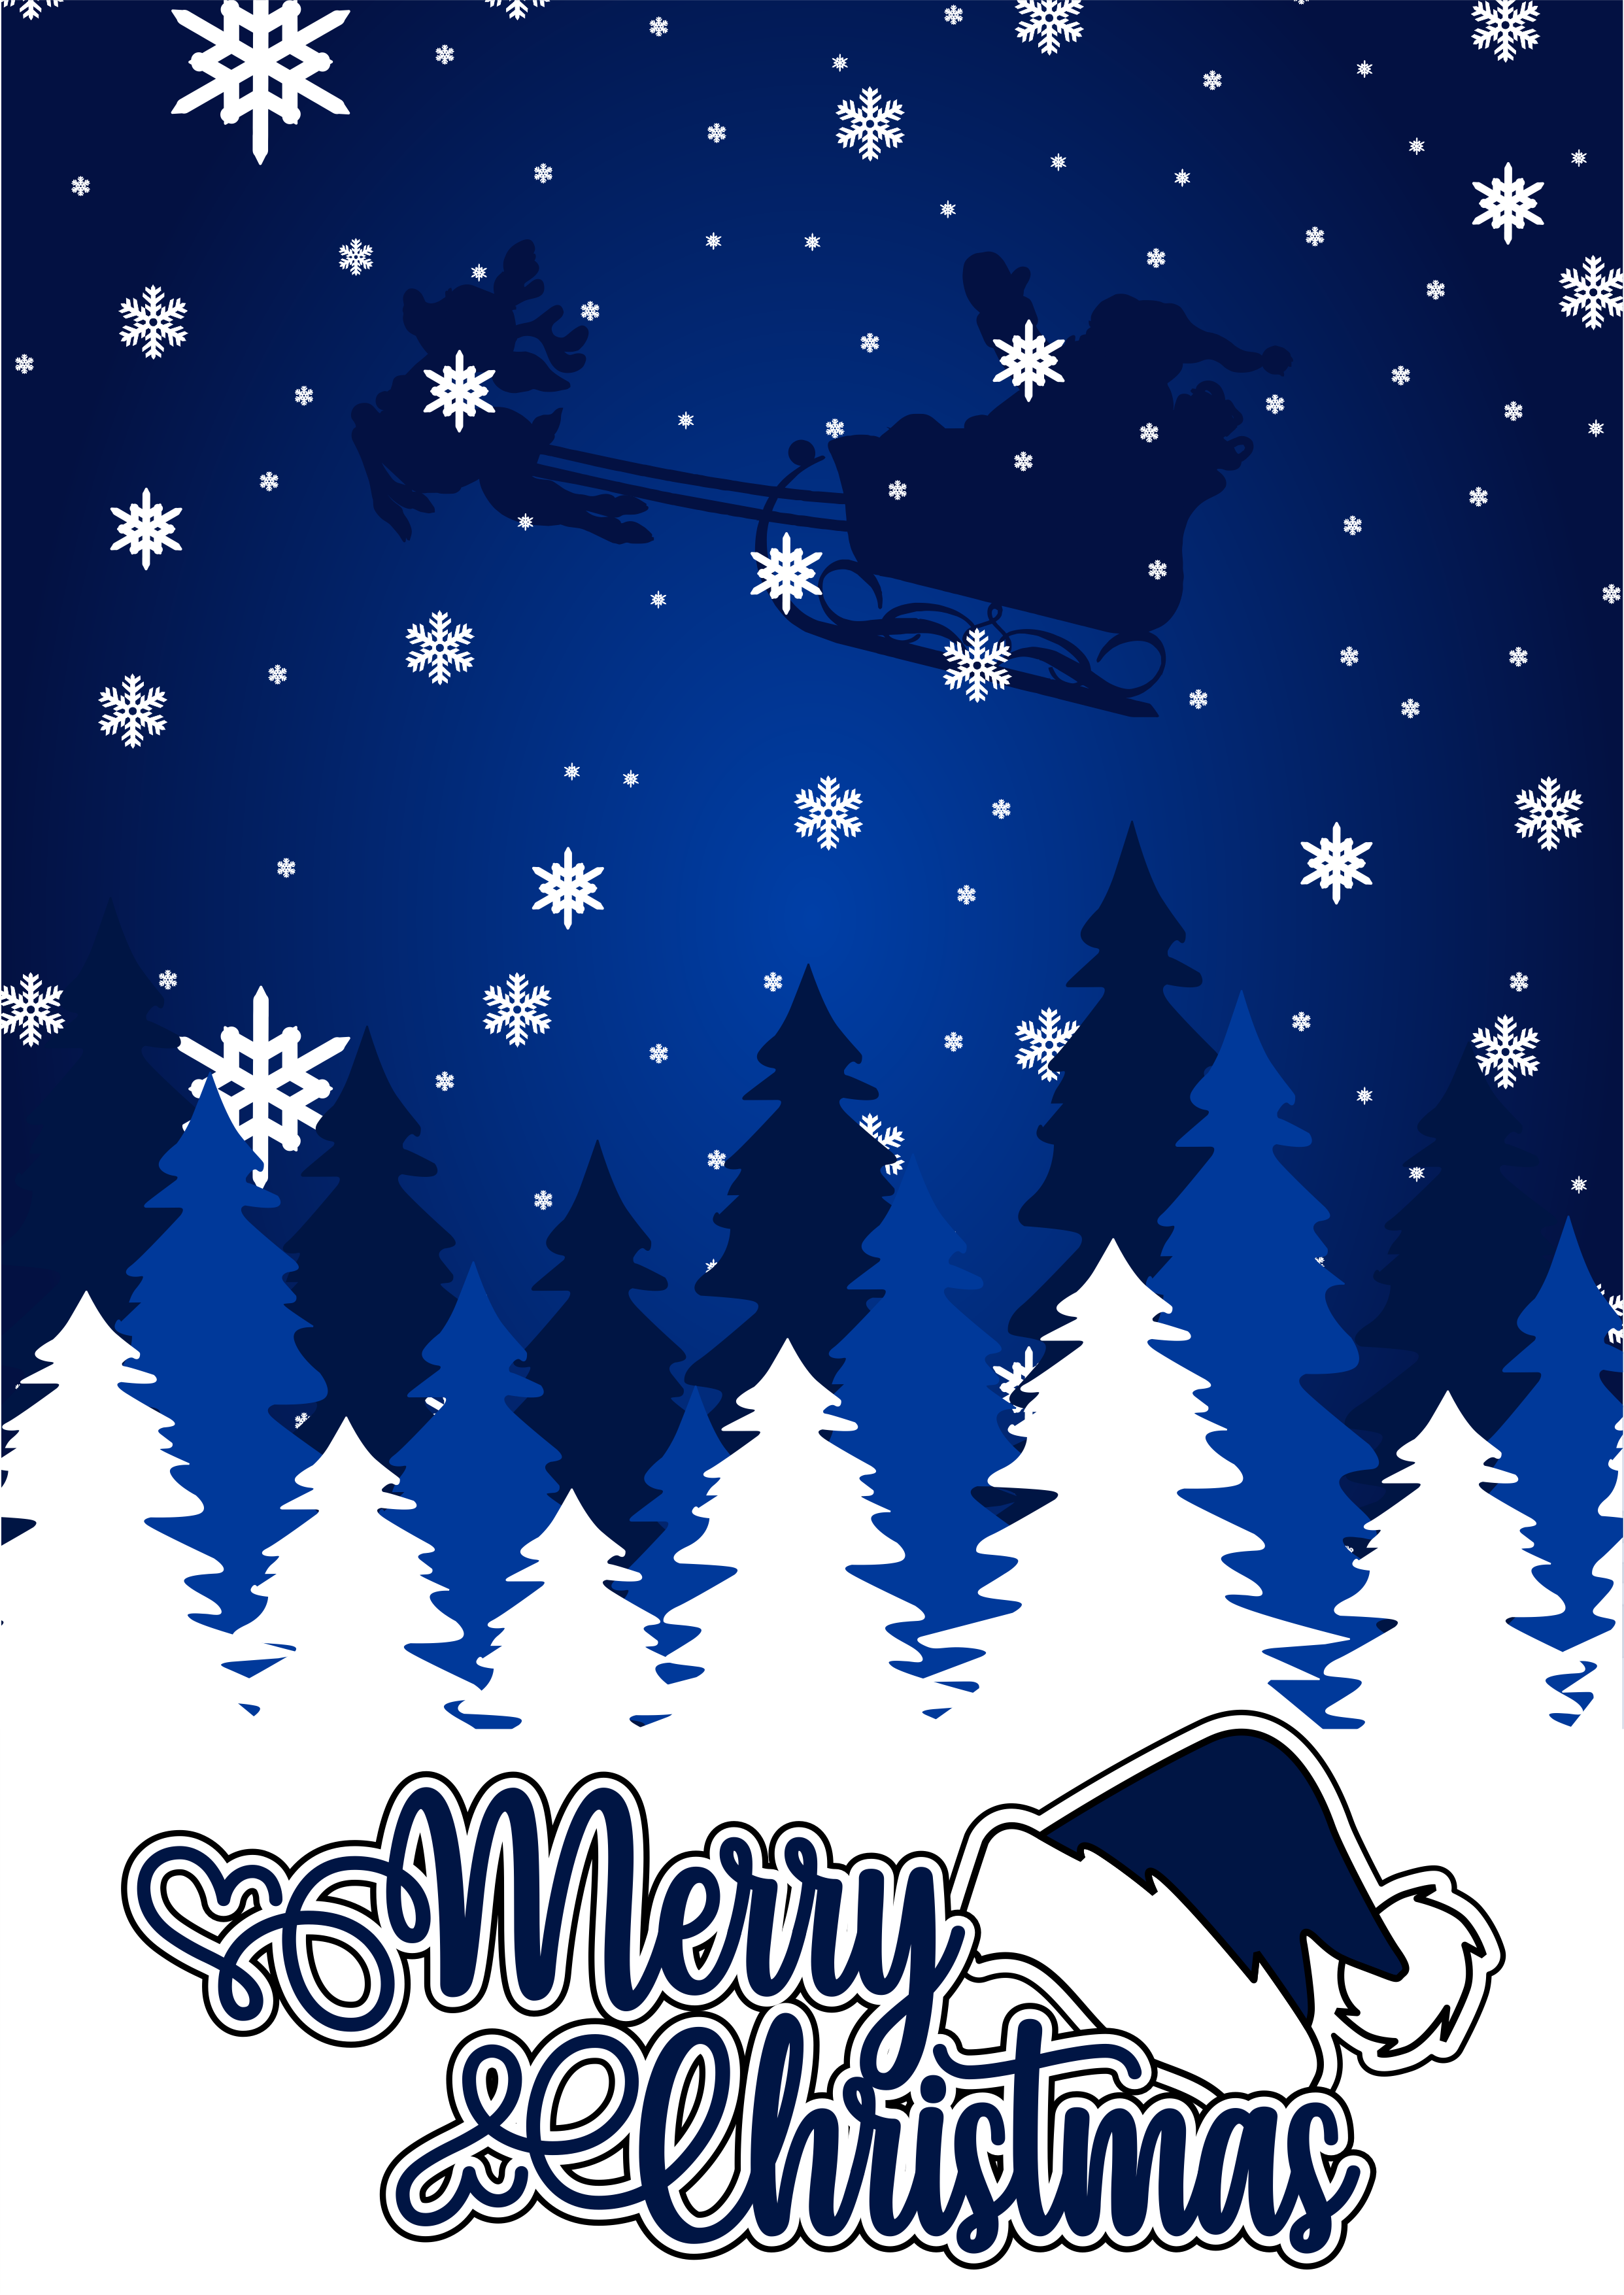 Merry Christmas night wallpaper clipart png